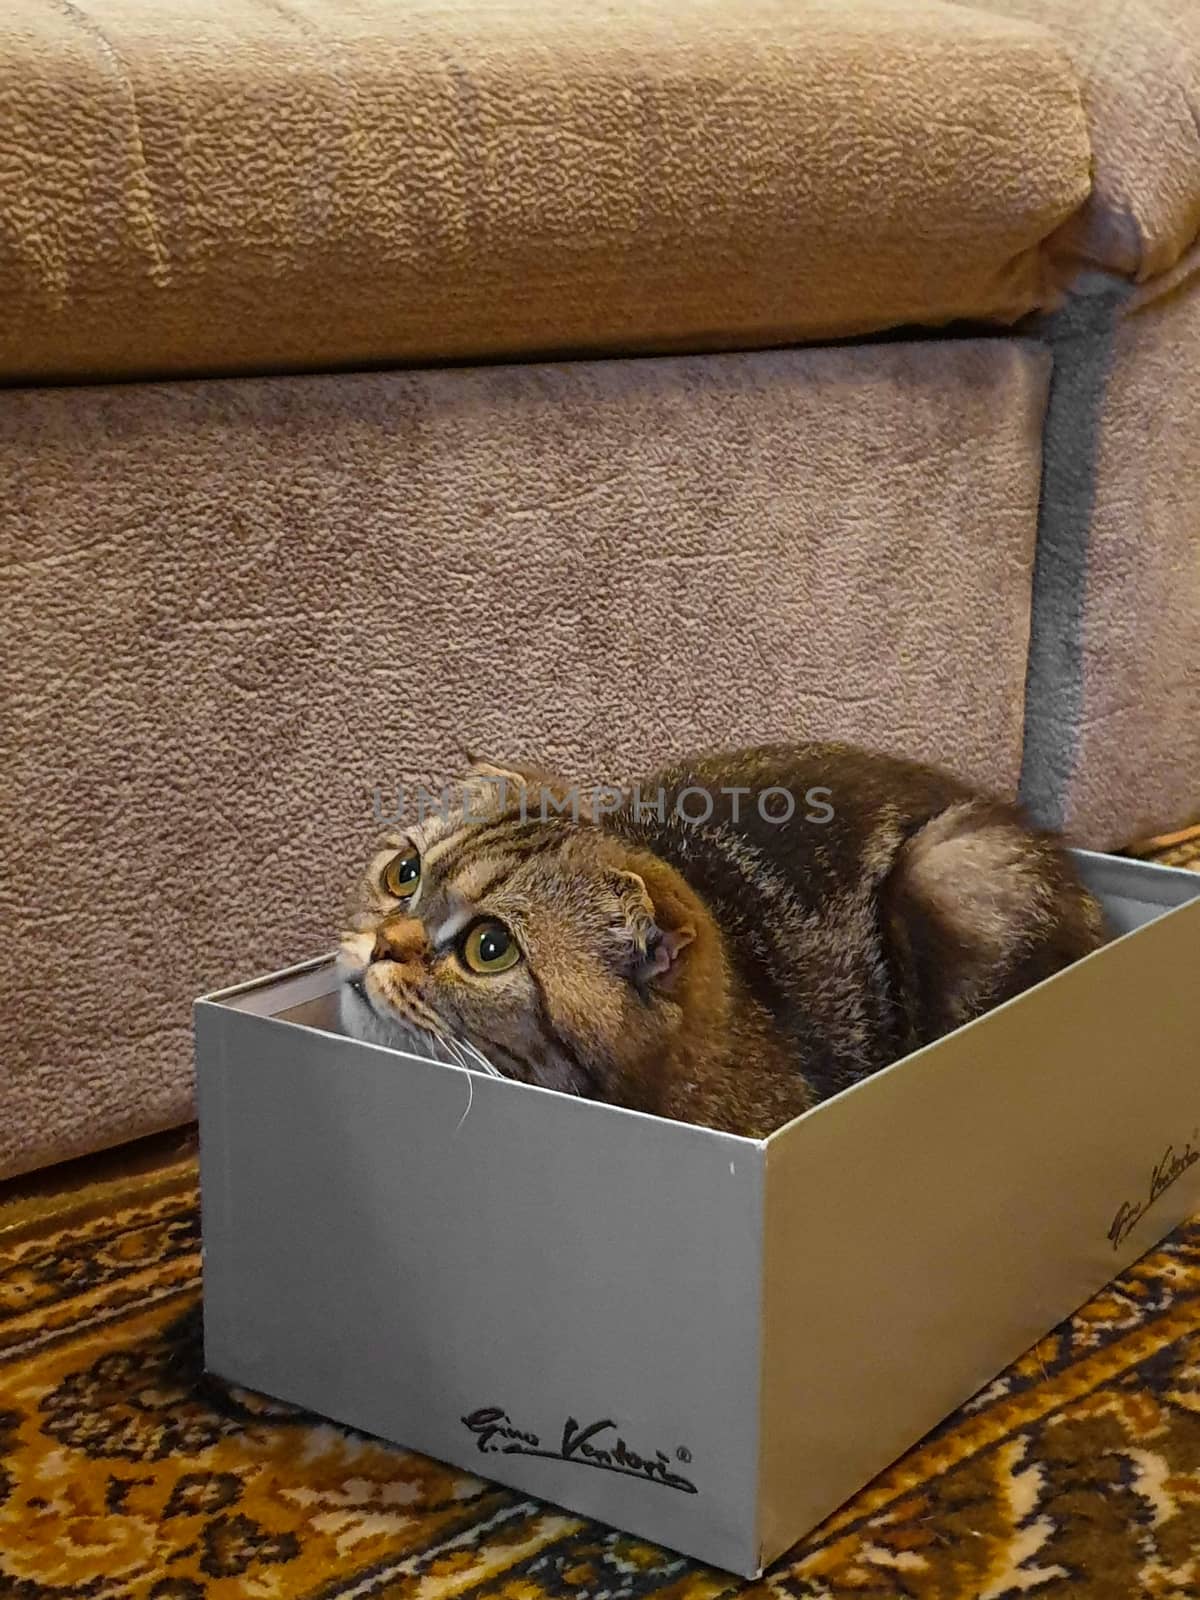 THERE IS A CUTE CAT INSIDE OF THE SHOE BOX